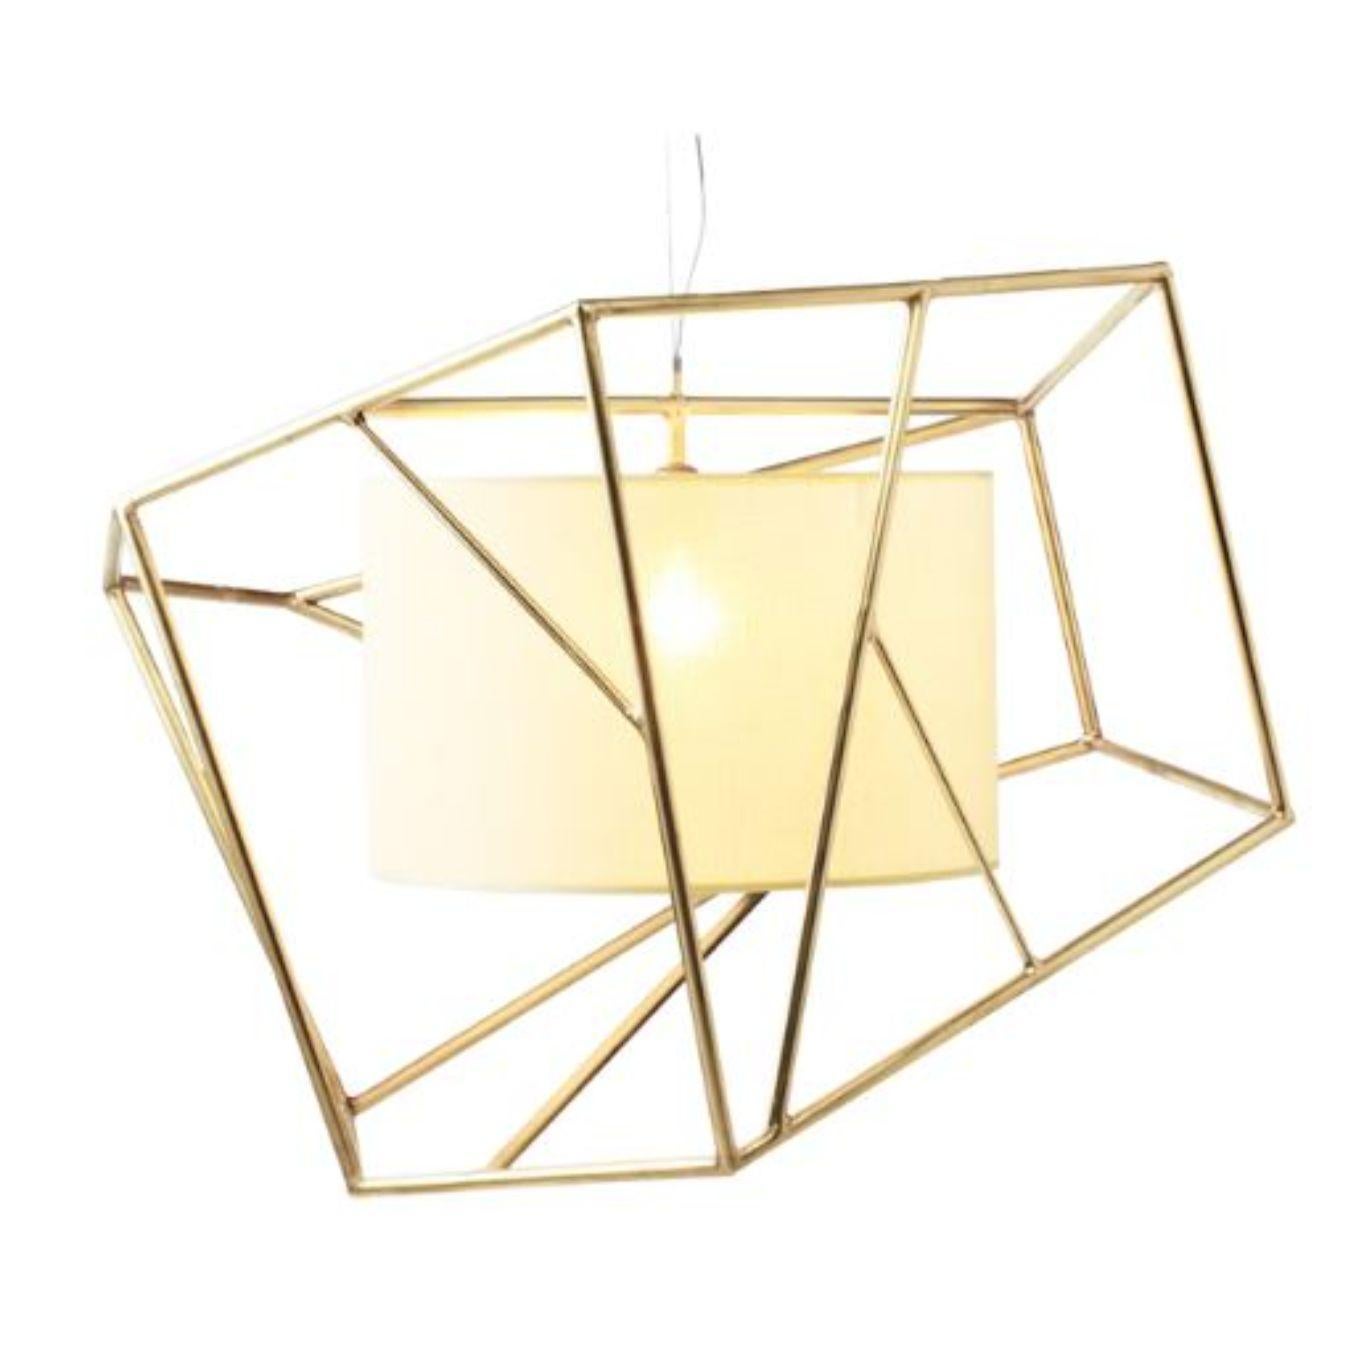 Brass Star suspension lamp by Dooq.
Dimensions: W 80 x D 80 x H 70 cm
Materials: lacquered metal, polished or satin metal, brass.
abat-jour: linen
Also available in different colors and materials.

Information:
230V/50Hz
E27/1x20W